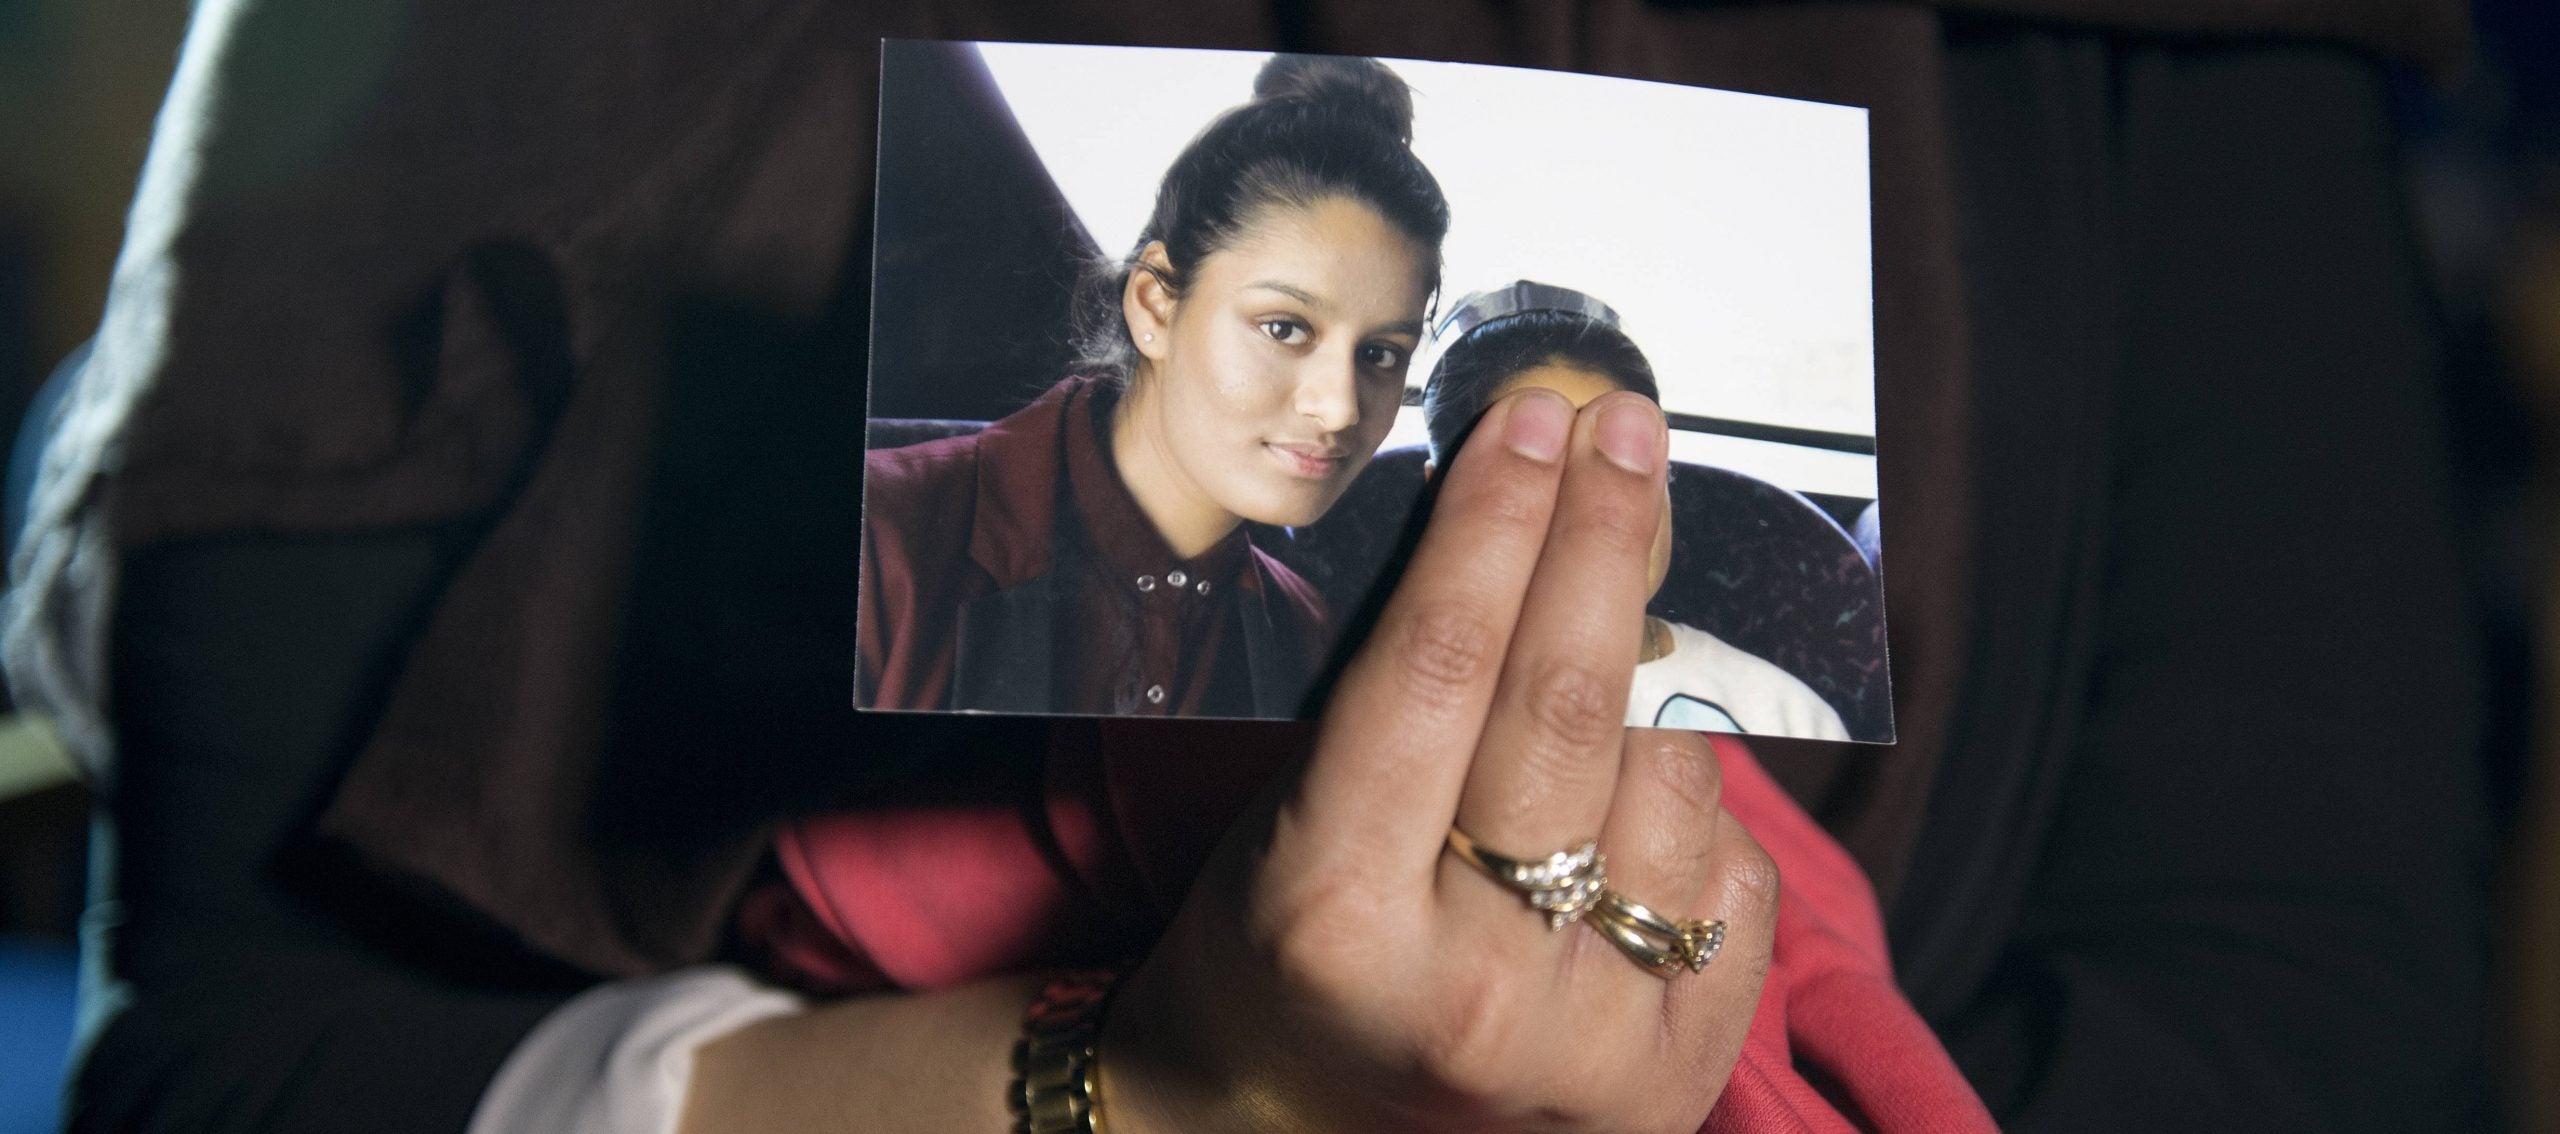 Shamima Begum’s lawyer: “The court ruling shows there are grades of citizenship”